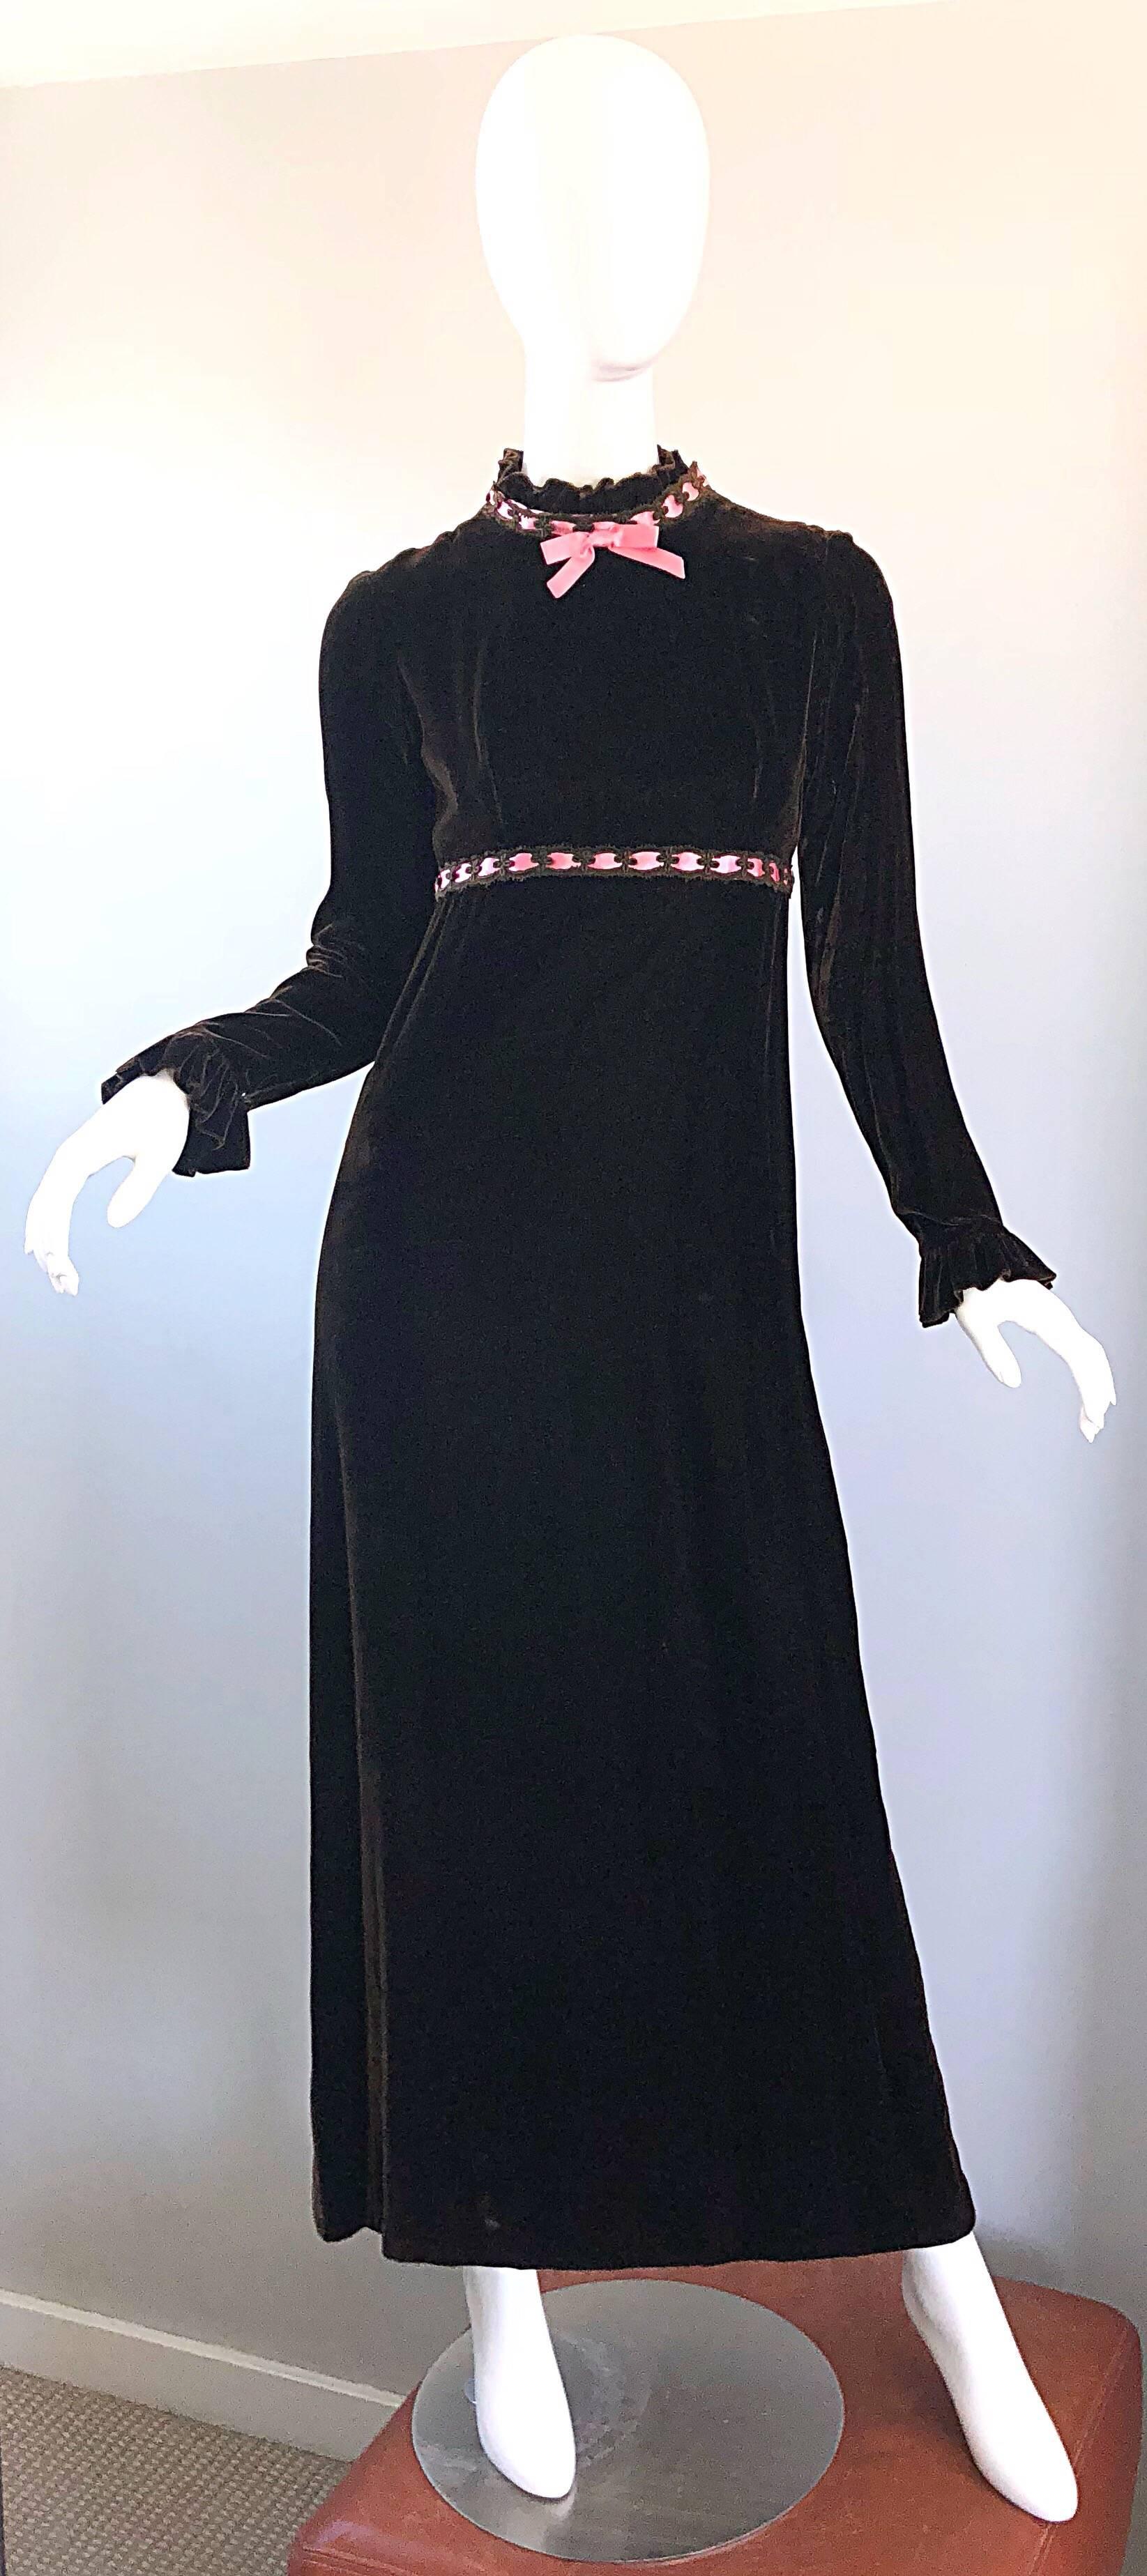 Gorgeous 1970s chocolate brown and pink silk velvet evening gown! Features a chic Victorian inspired high neck. Bubblegum pink ribbon on the collar and empire waist. Sleek long sleeves feature ruffled cuffs with hidden snaps. Full metal zipper up